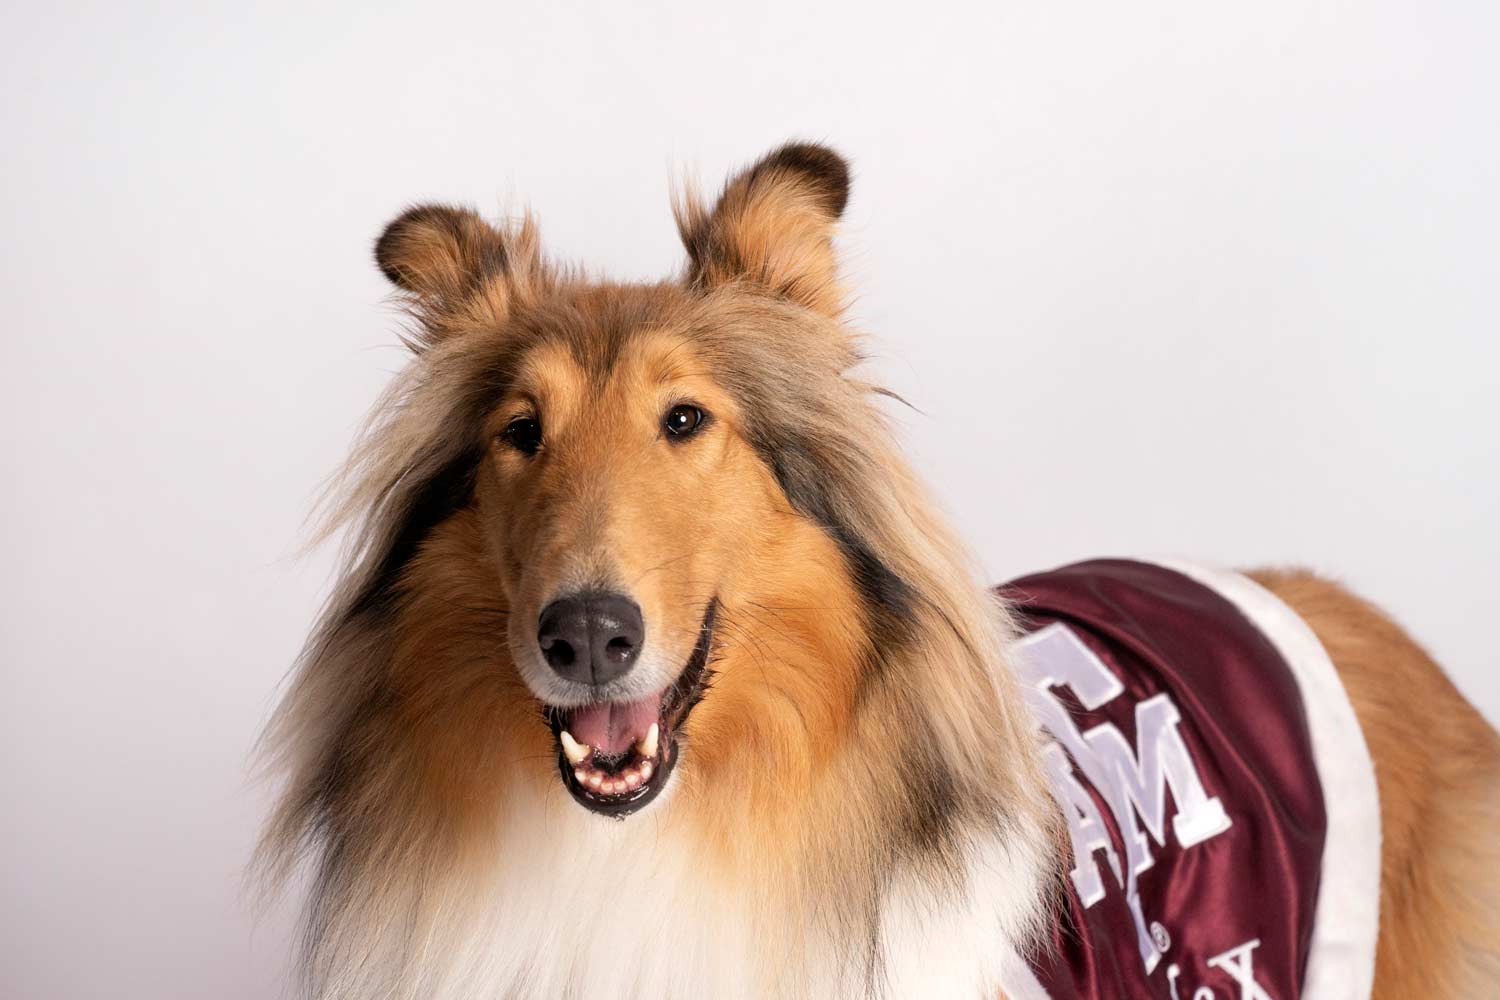 Reveille smiling for the camera